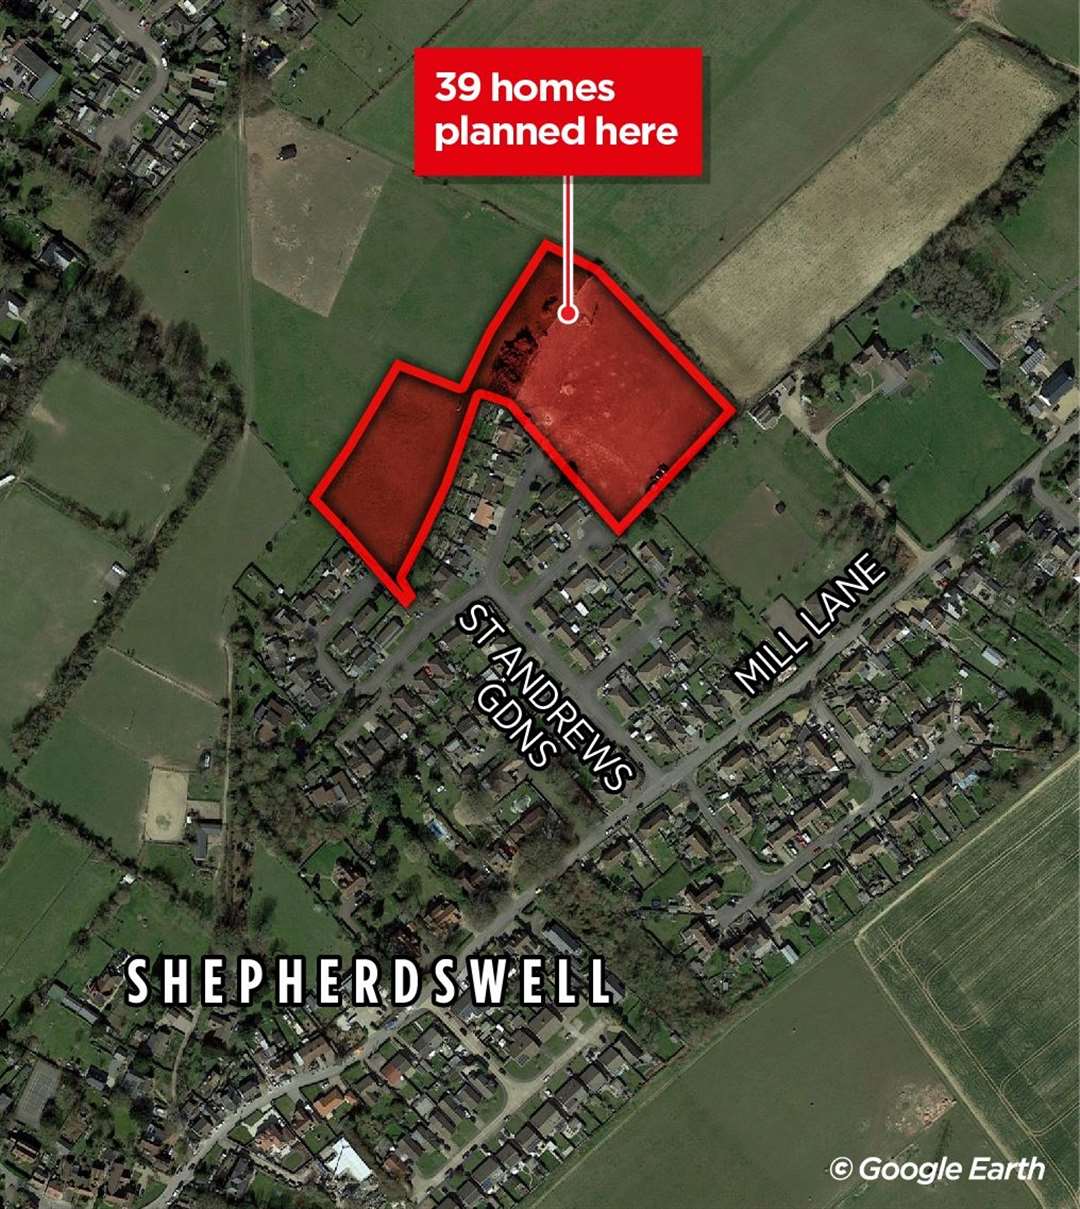 The bungalows are set to be built in St Andrews Gardens, Shepherdswell